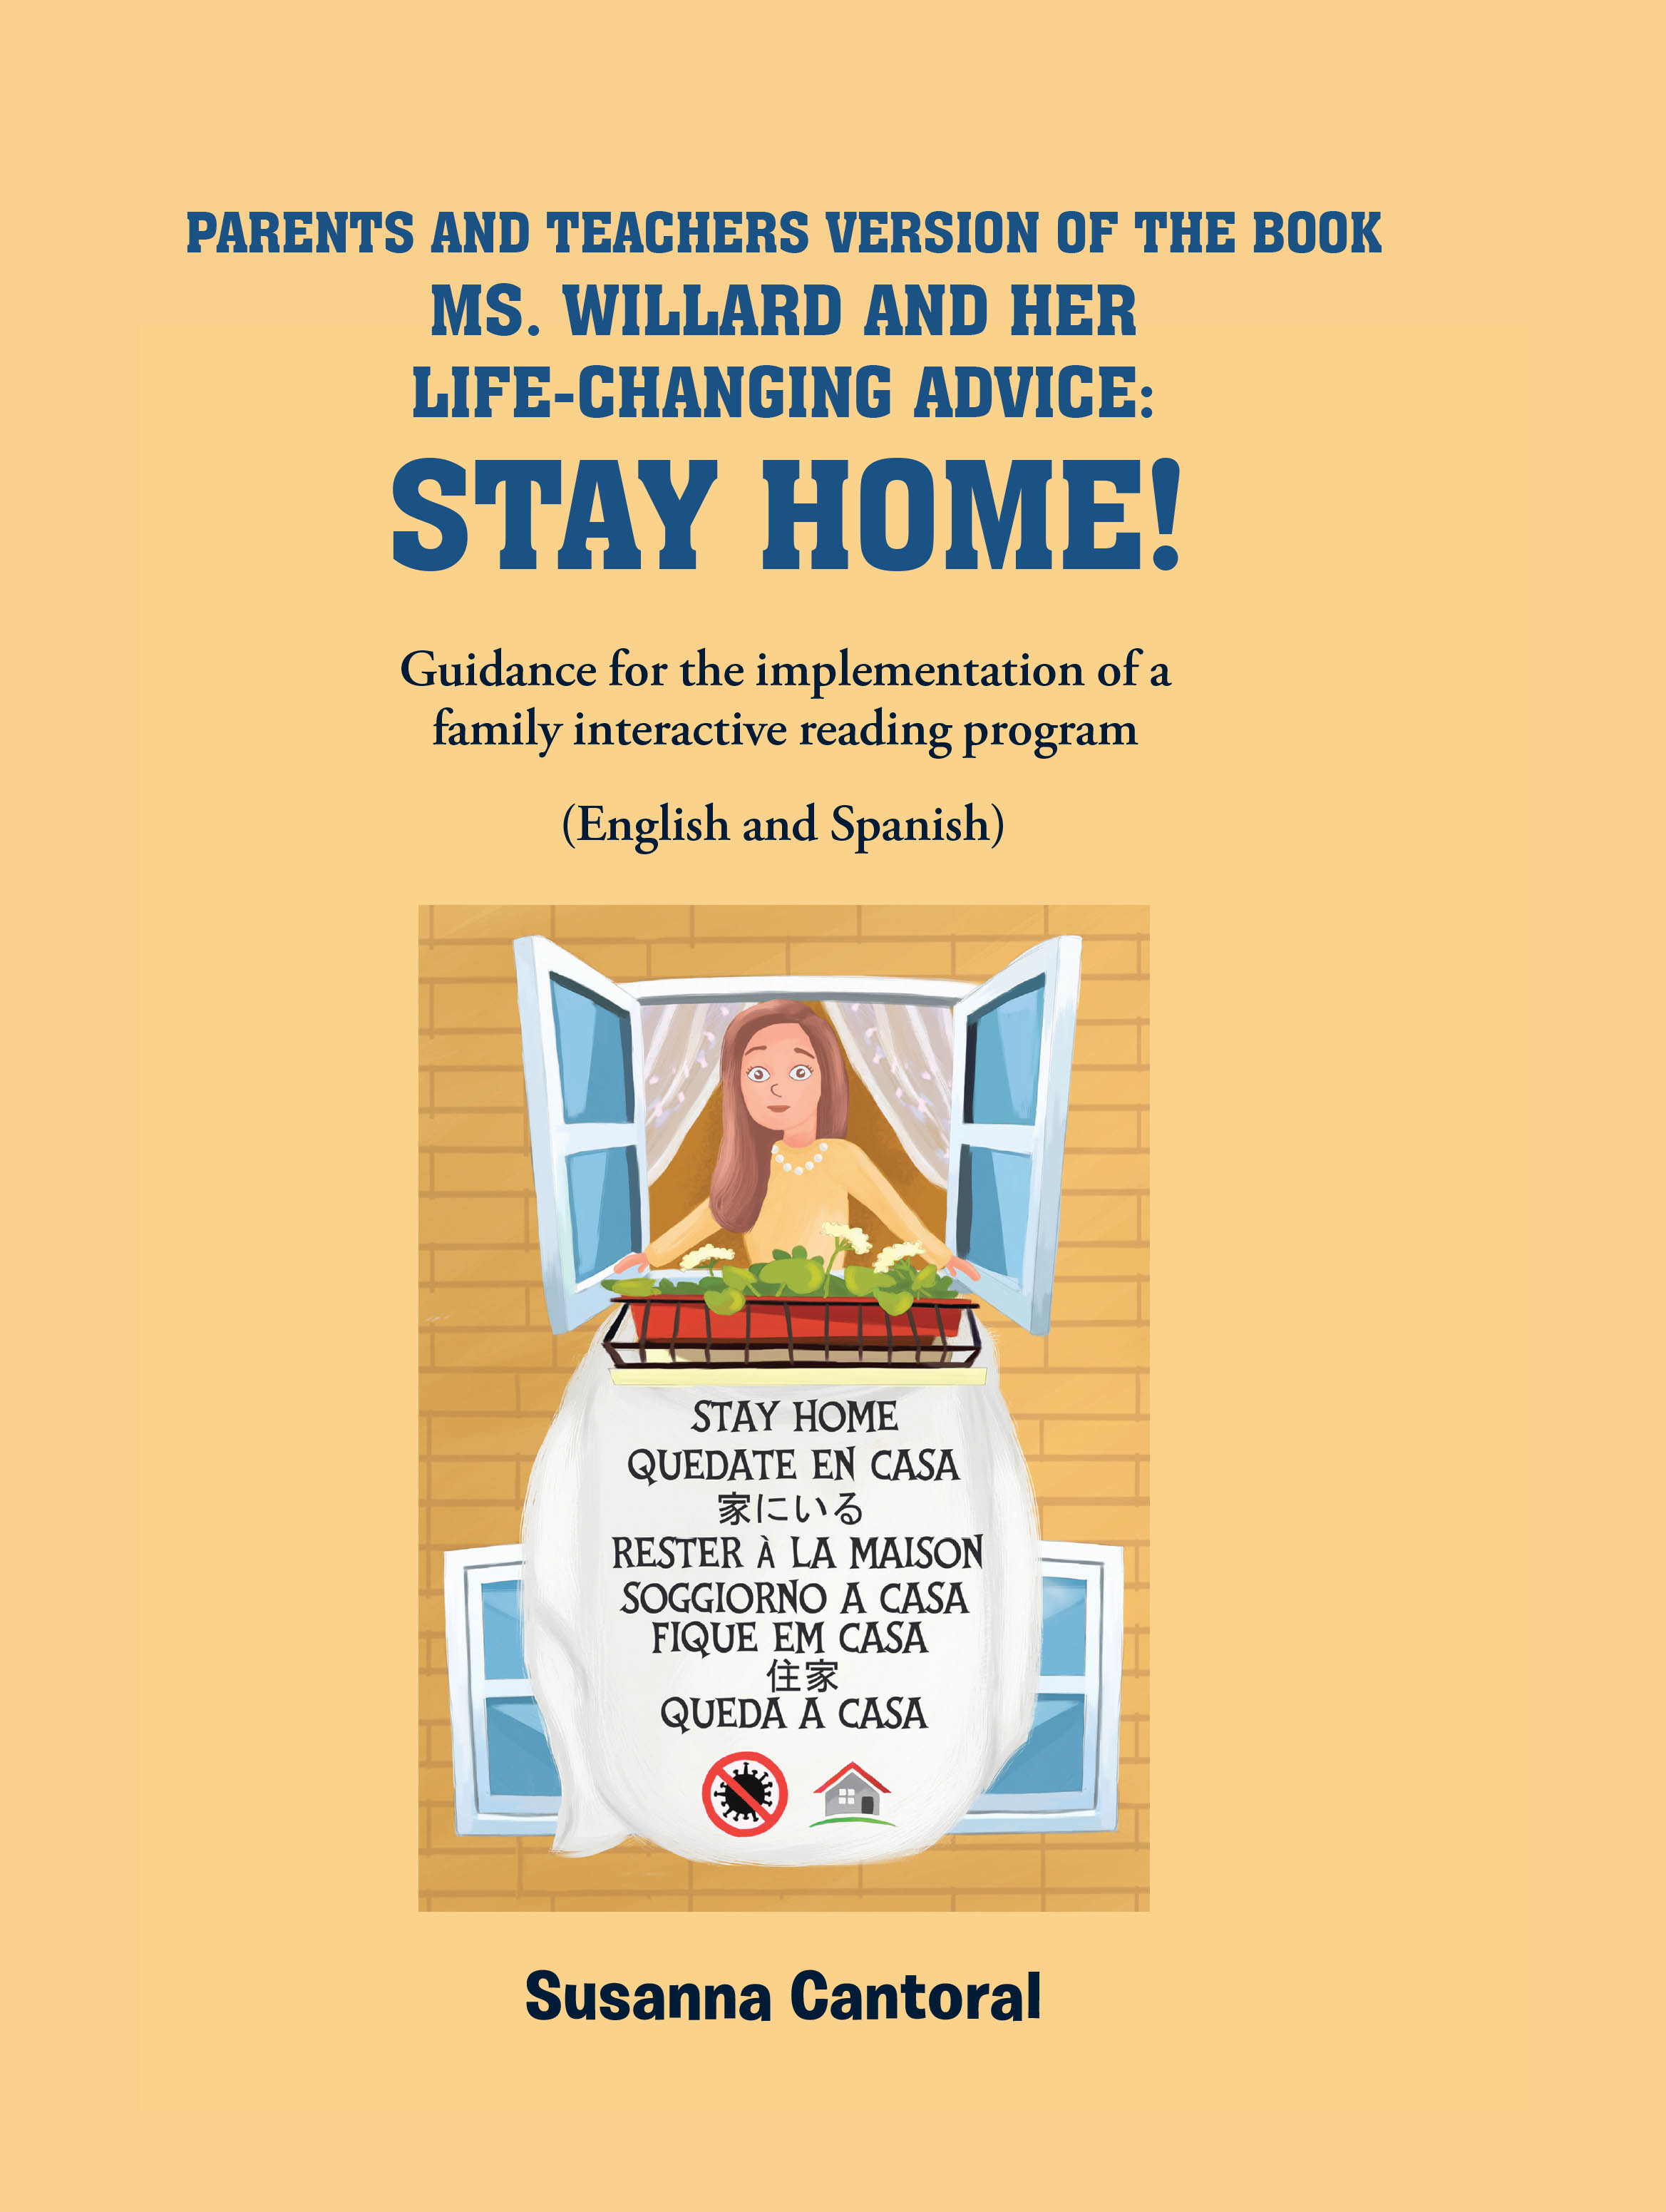 Susanna Cantoral’s New Book, “Ms. Willard and Her Life-Changing Advice,” is an Insightful Read That Reinforces Family Ties Through Interactive Reading